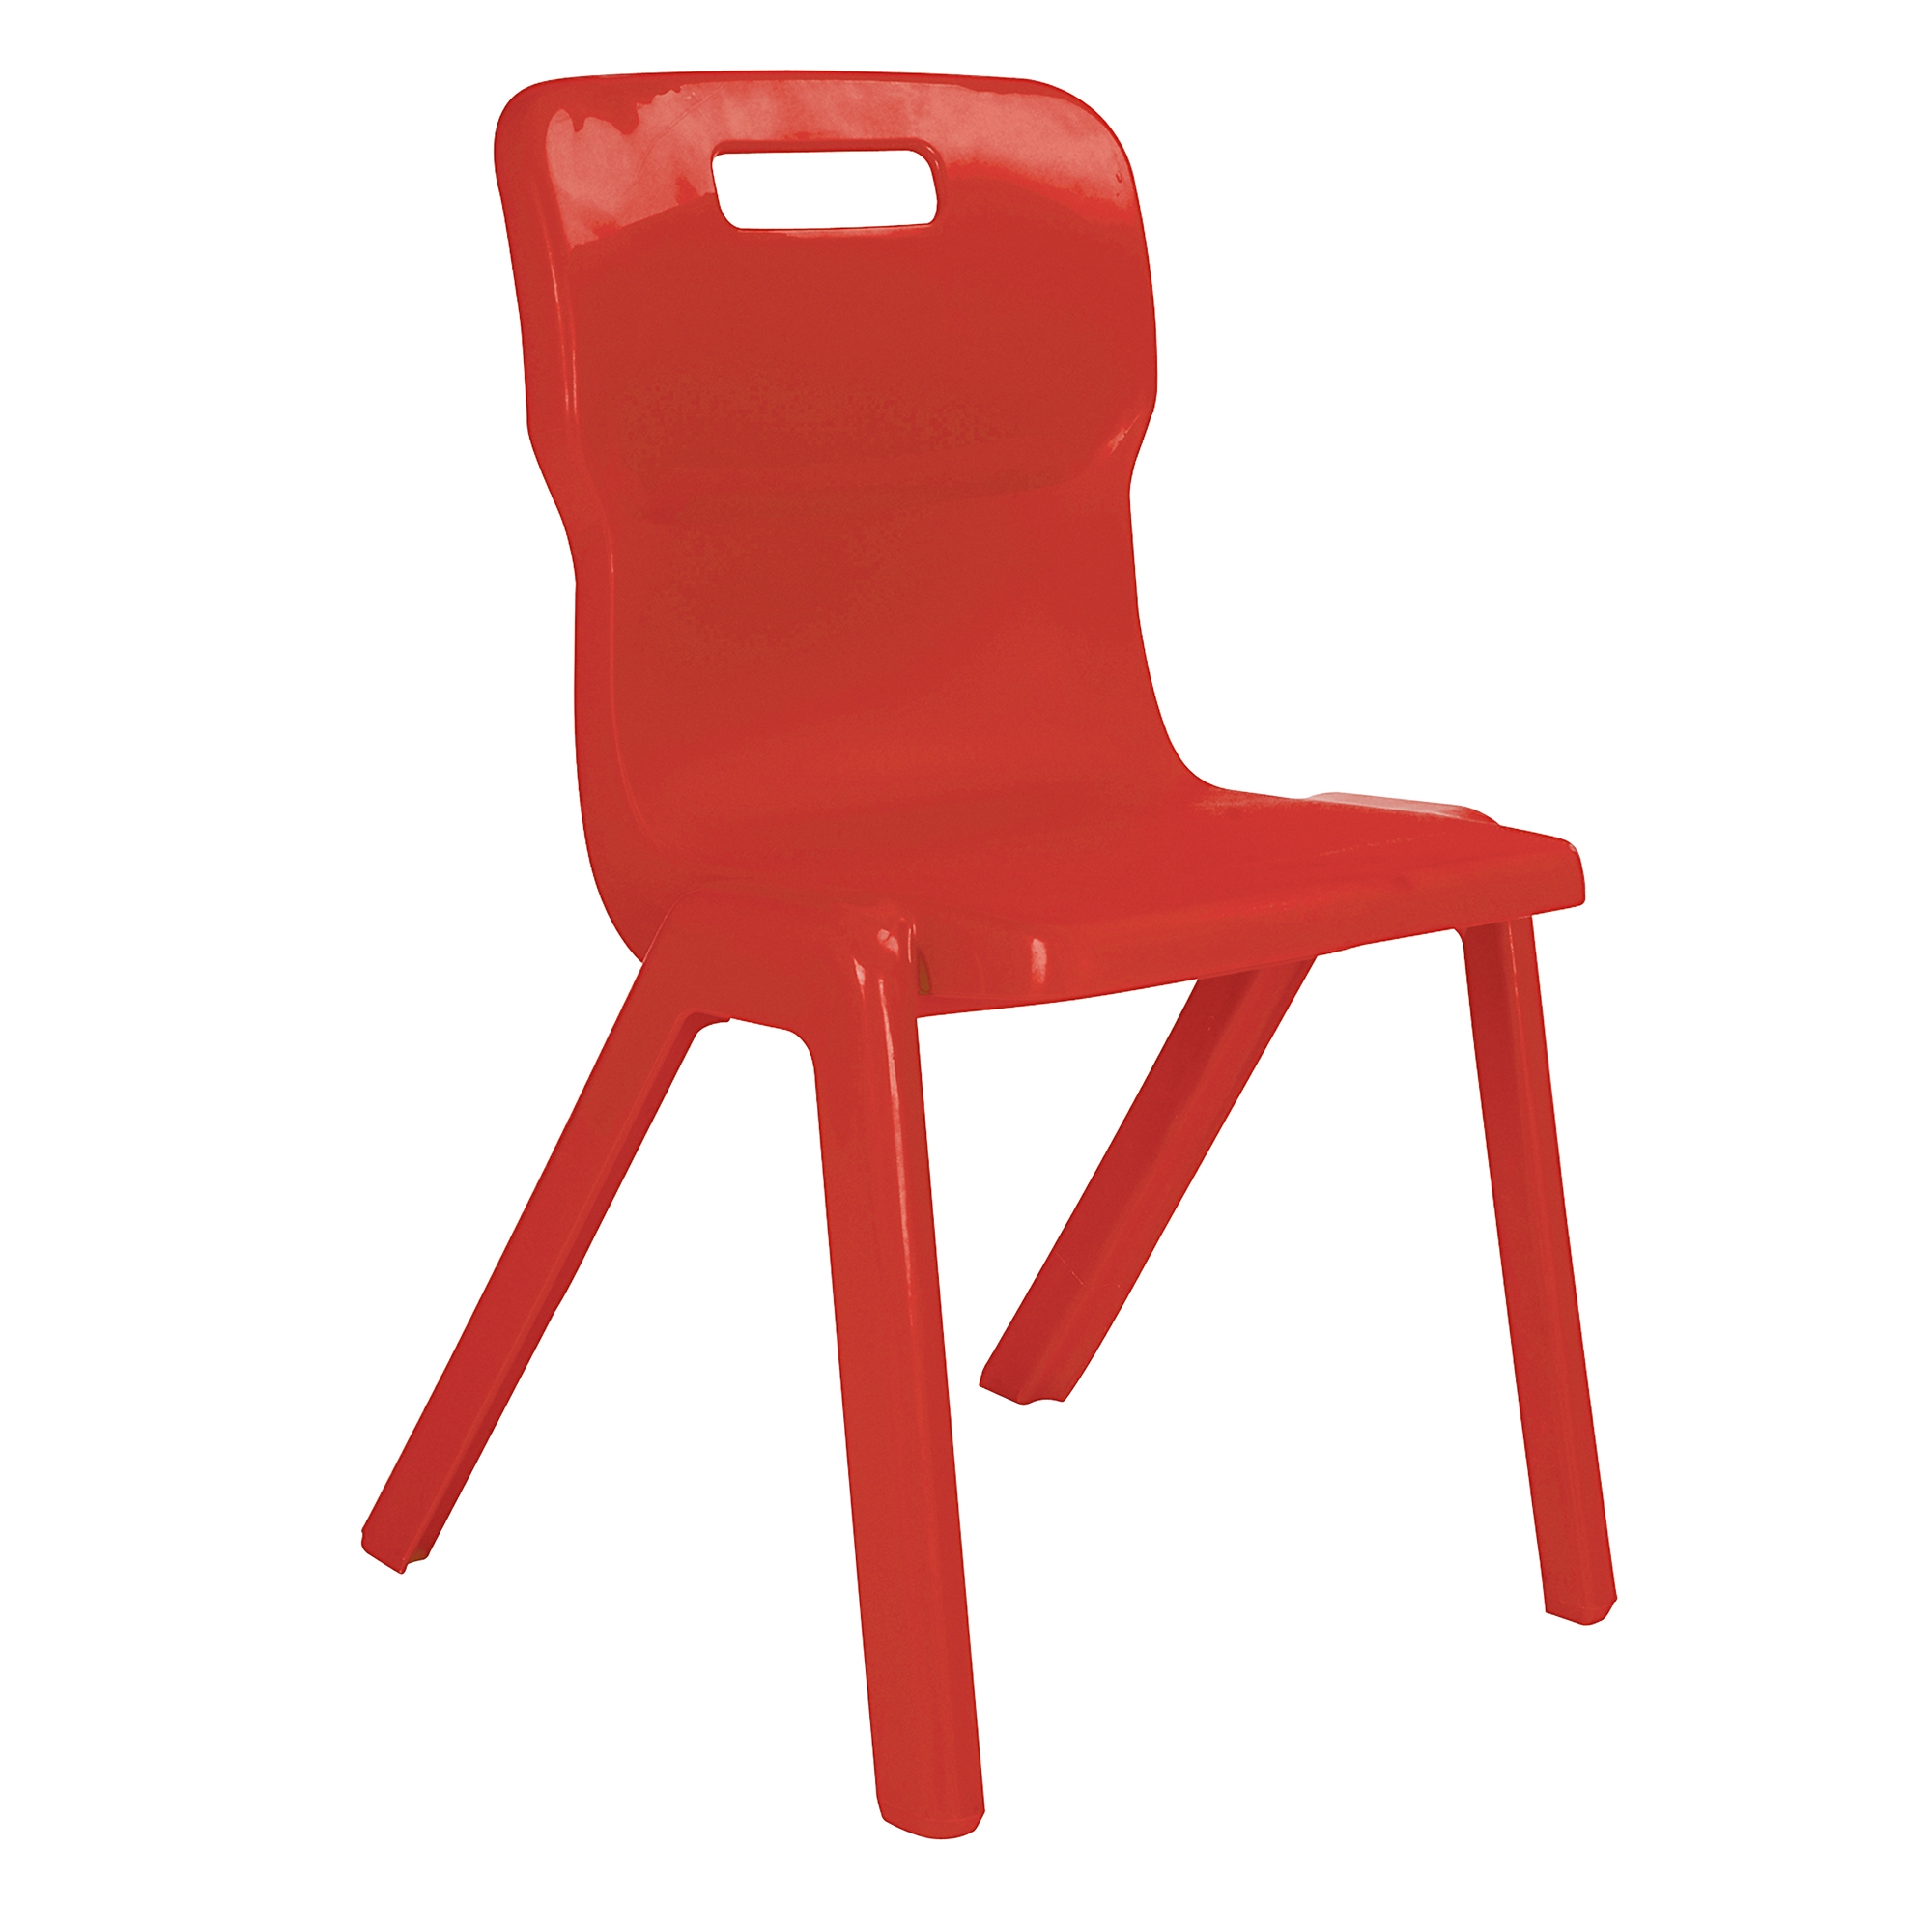 One Piece Titan Chair - Size 4 Ages 8-11 Red